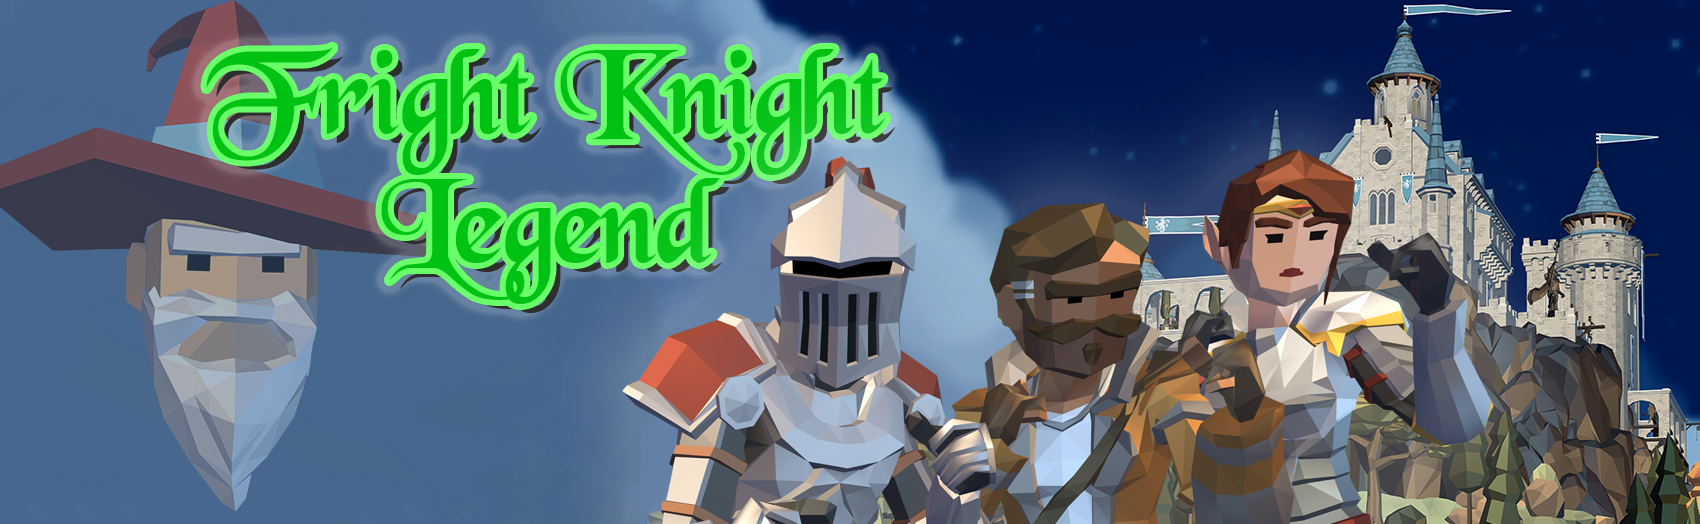 Game banner for Fright Knight Legend